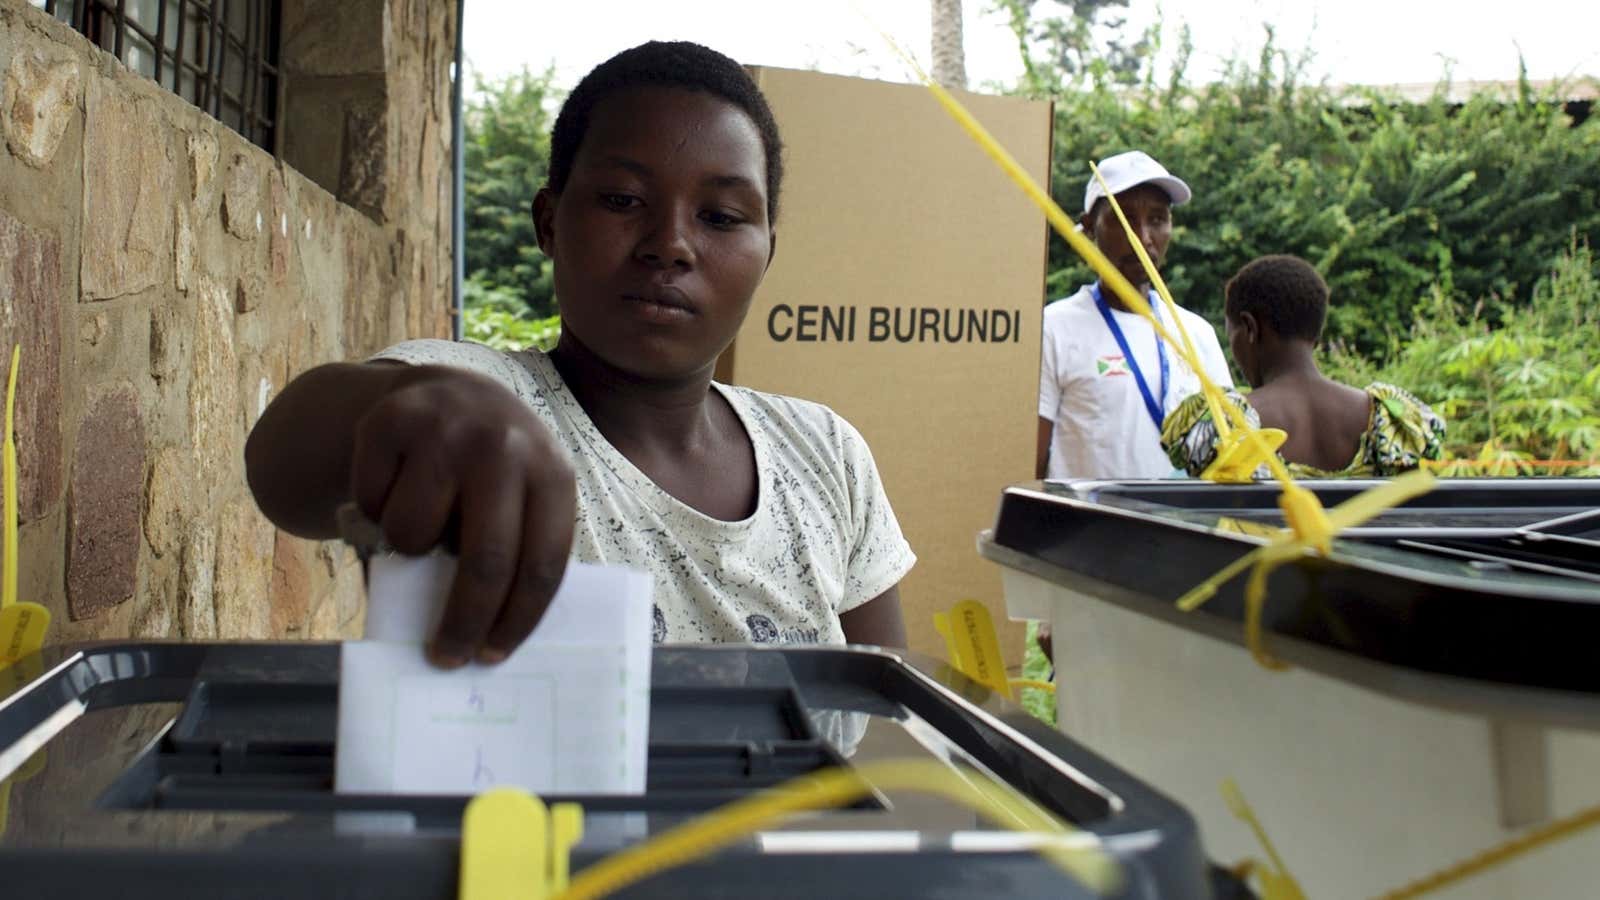 Elections amid tensions and instability in Burundi